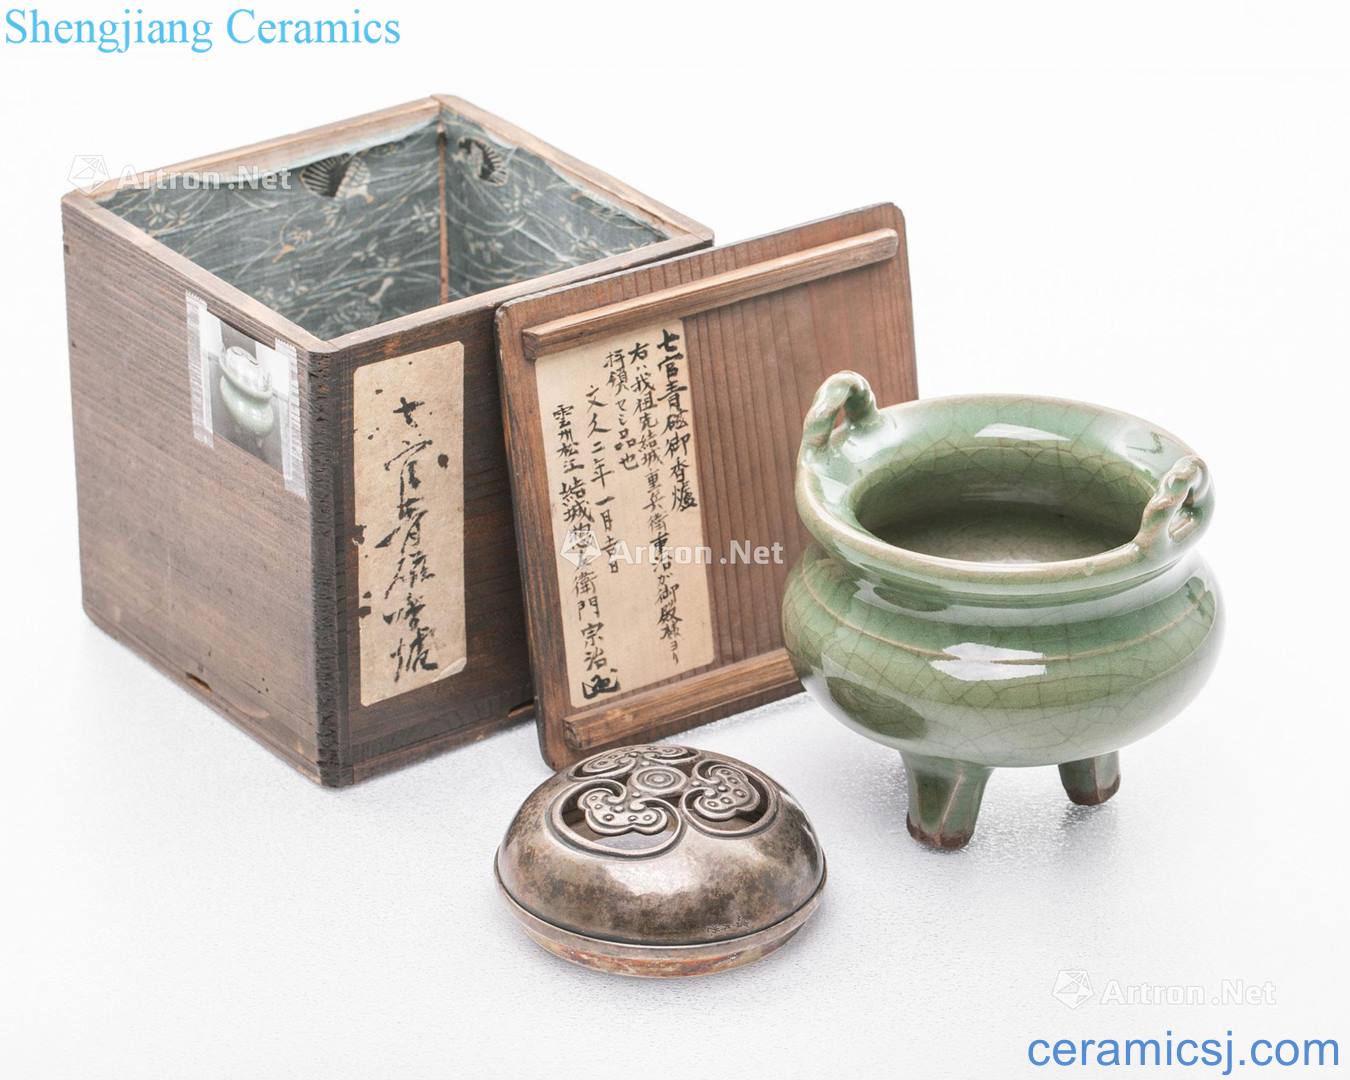 In the Ming dynasty Longquan celadon censer